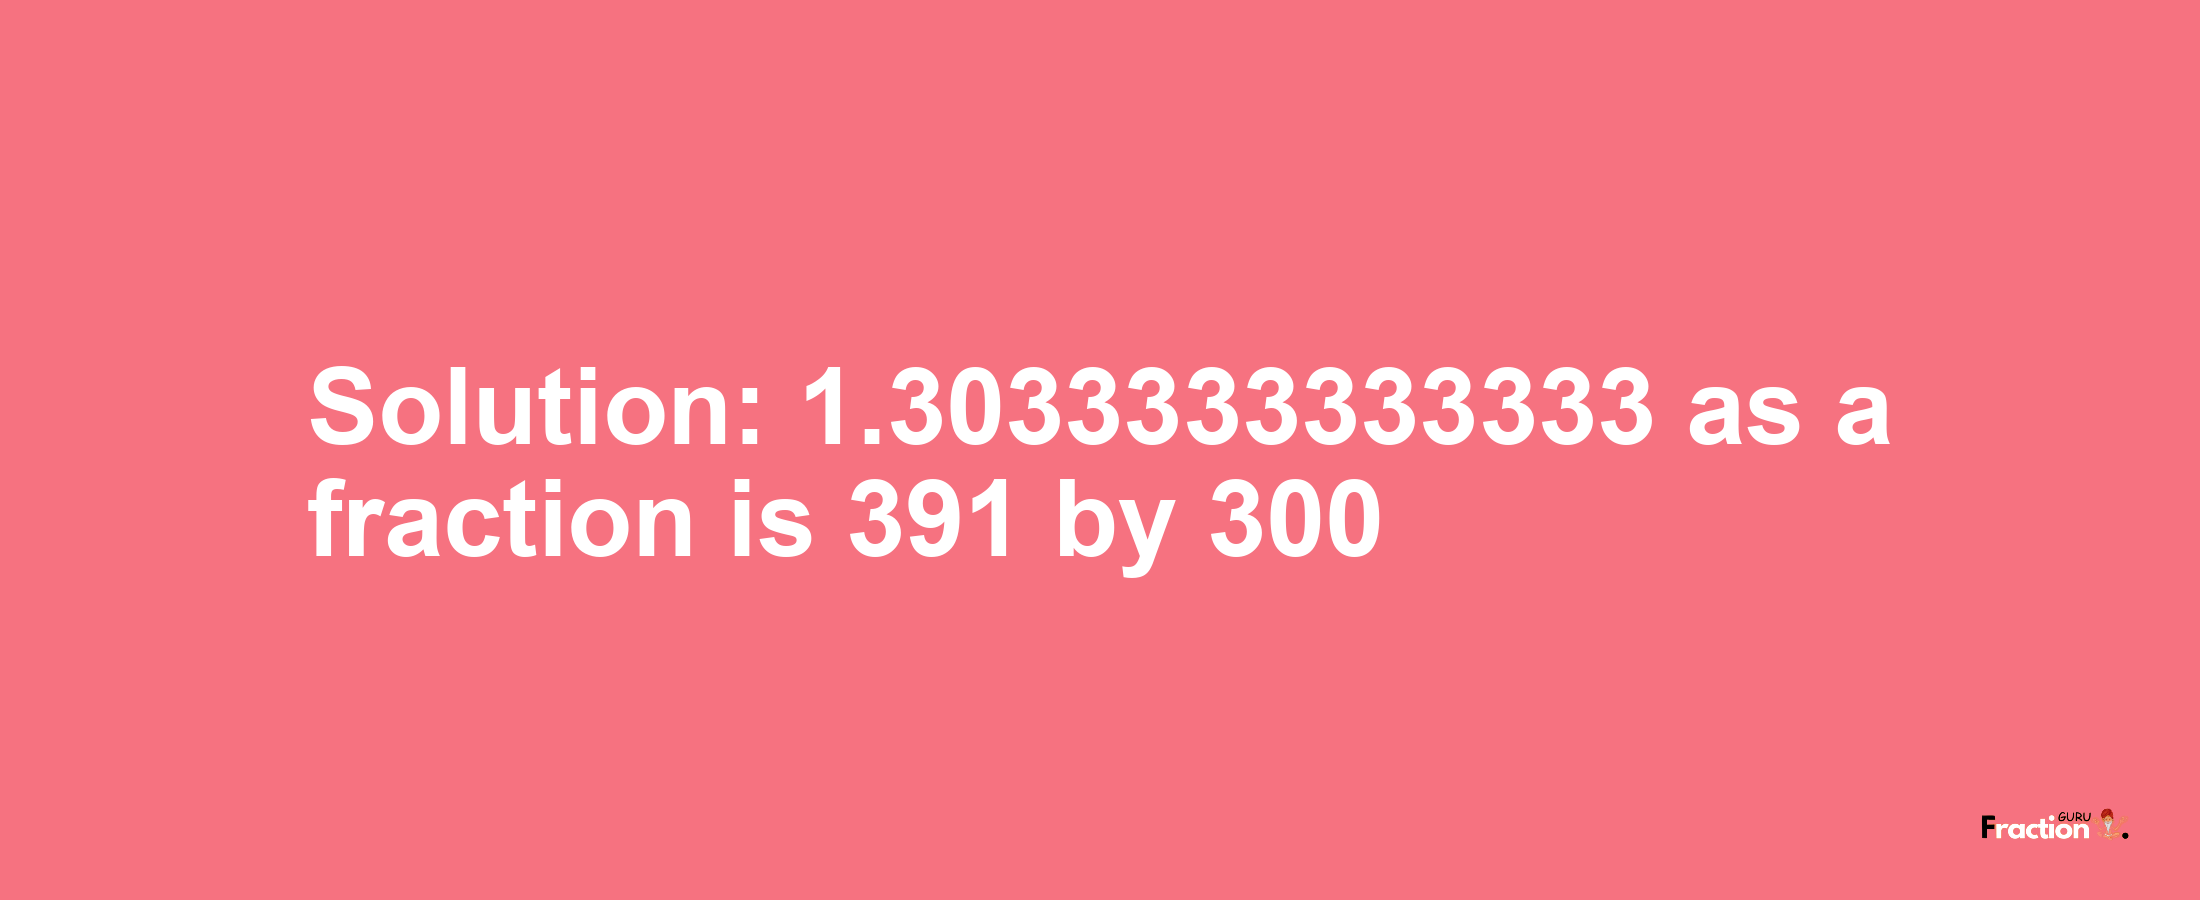 Solution:1.3033333333333 as a fraction is 391/300